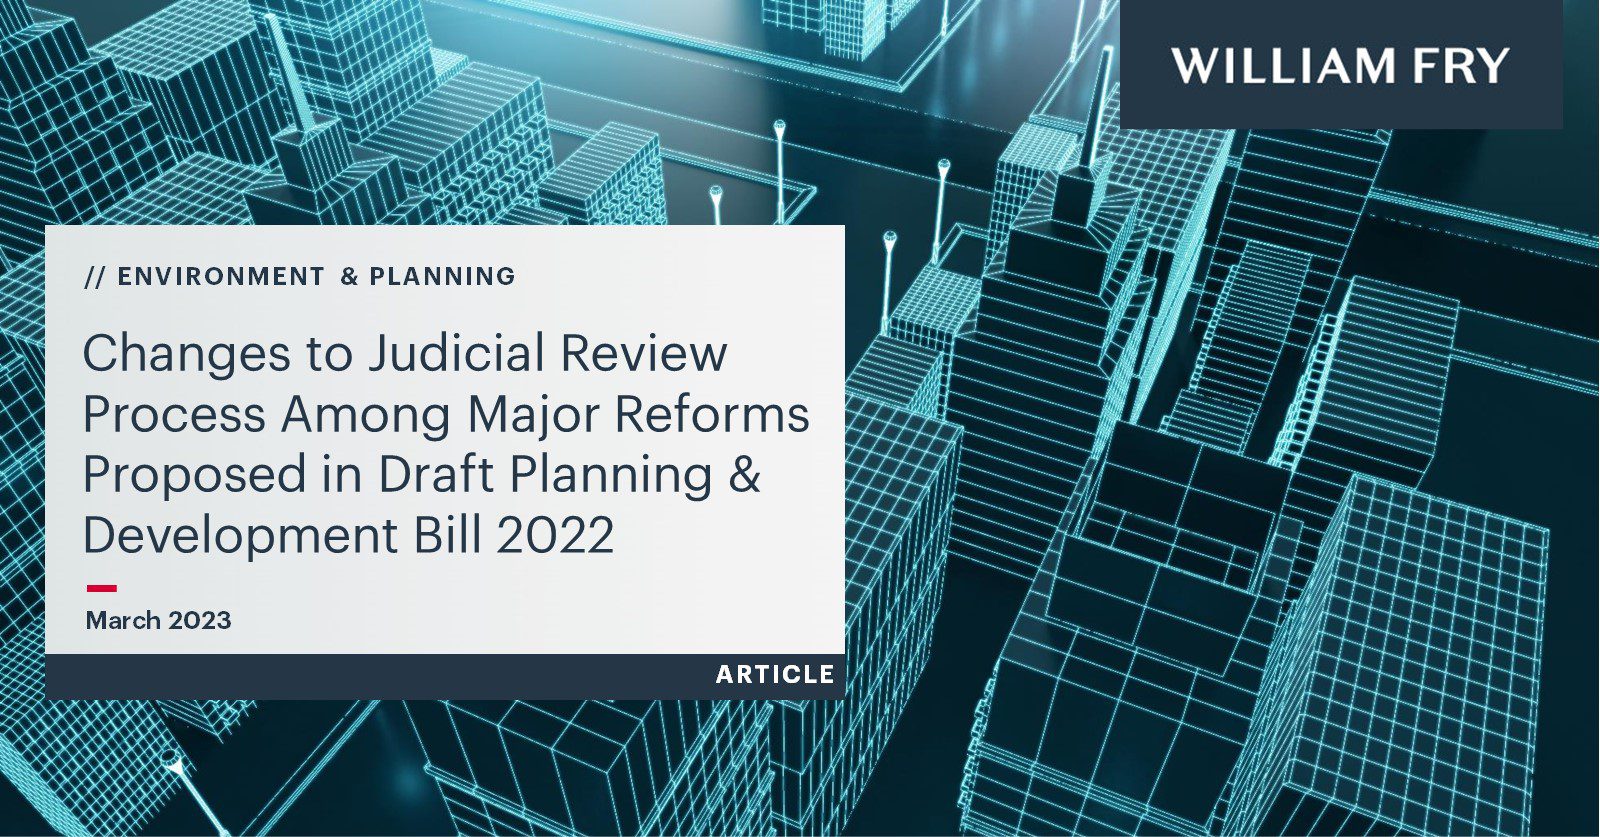 Changes to Judicial Review Process Among Major Reforms Proposed in Draft Planning and Development Bill 2022